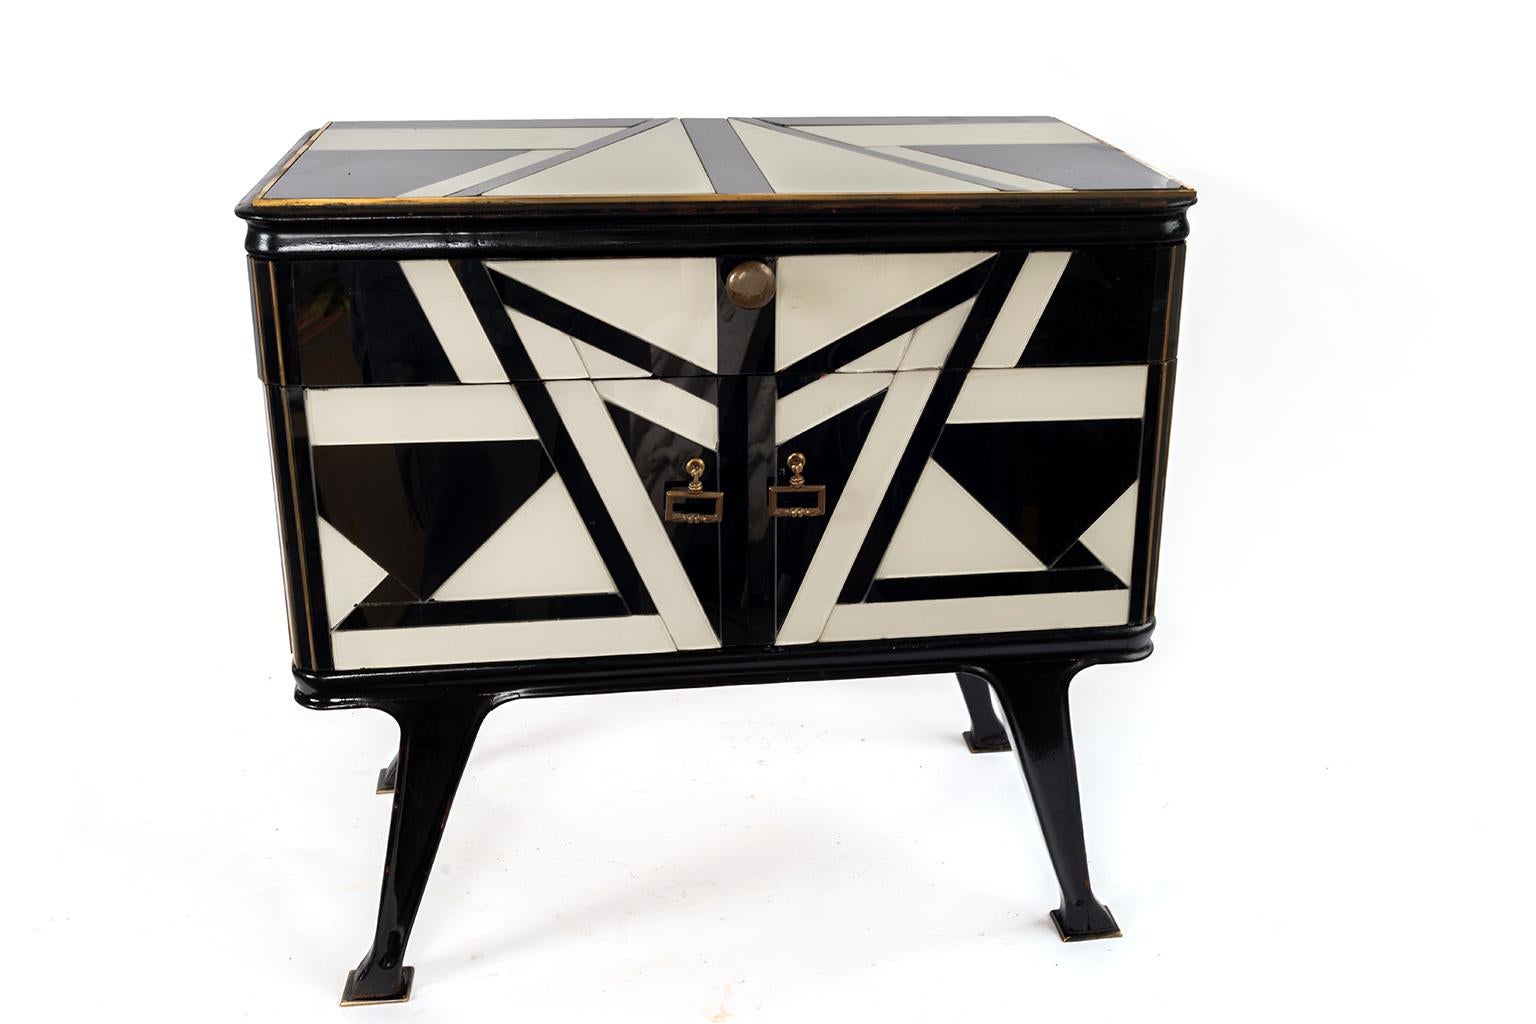 Pair of Black and White Side Tables with a Top Drawer (Mitte des 20. Jahrhunderts)